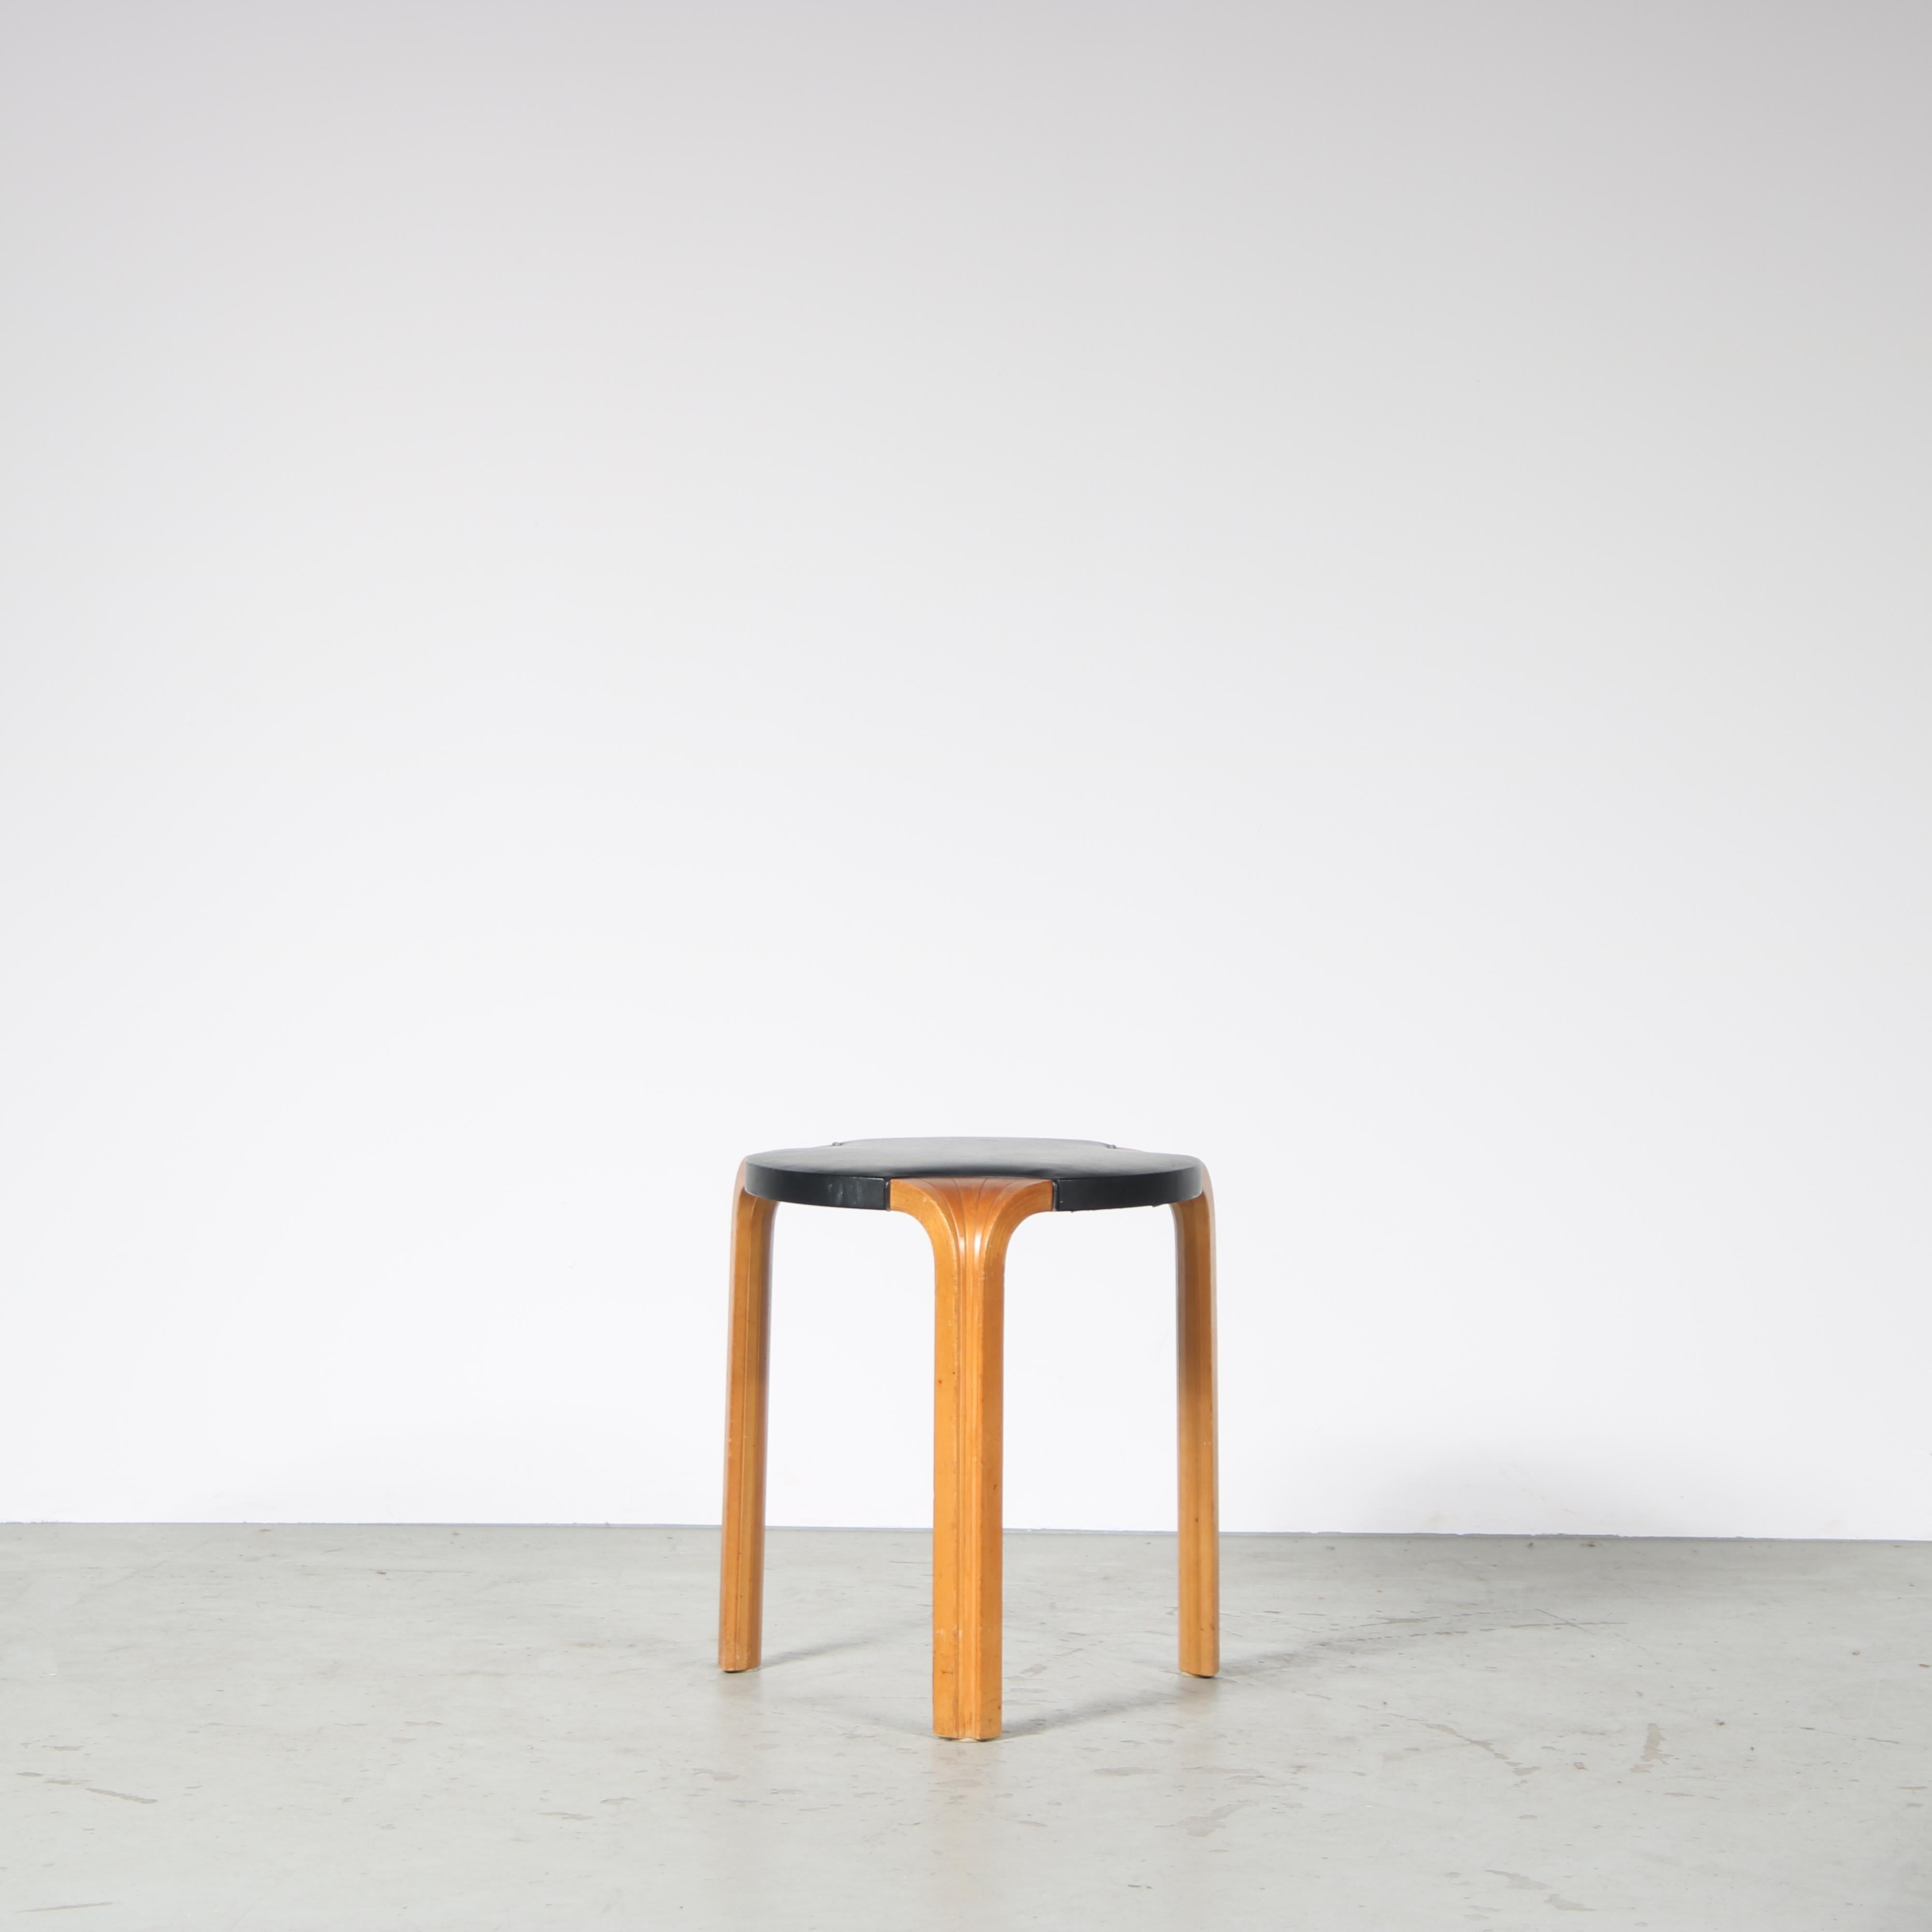 A beautiful and rare stool, model “X602”, designed by Alvar Aalto and manufactured by Artek in Finland around 1960.

This is an exceptional piece of mid-century Scandinavian design! This birch wooden stool has a beautiful, minimalist design with a